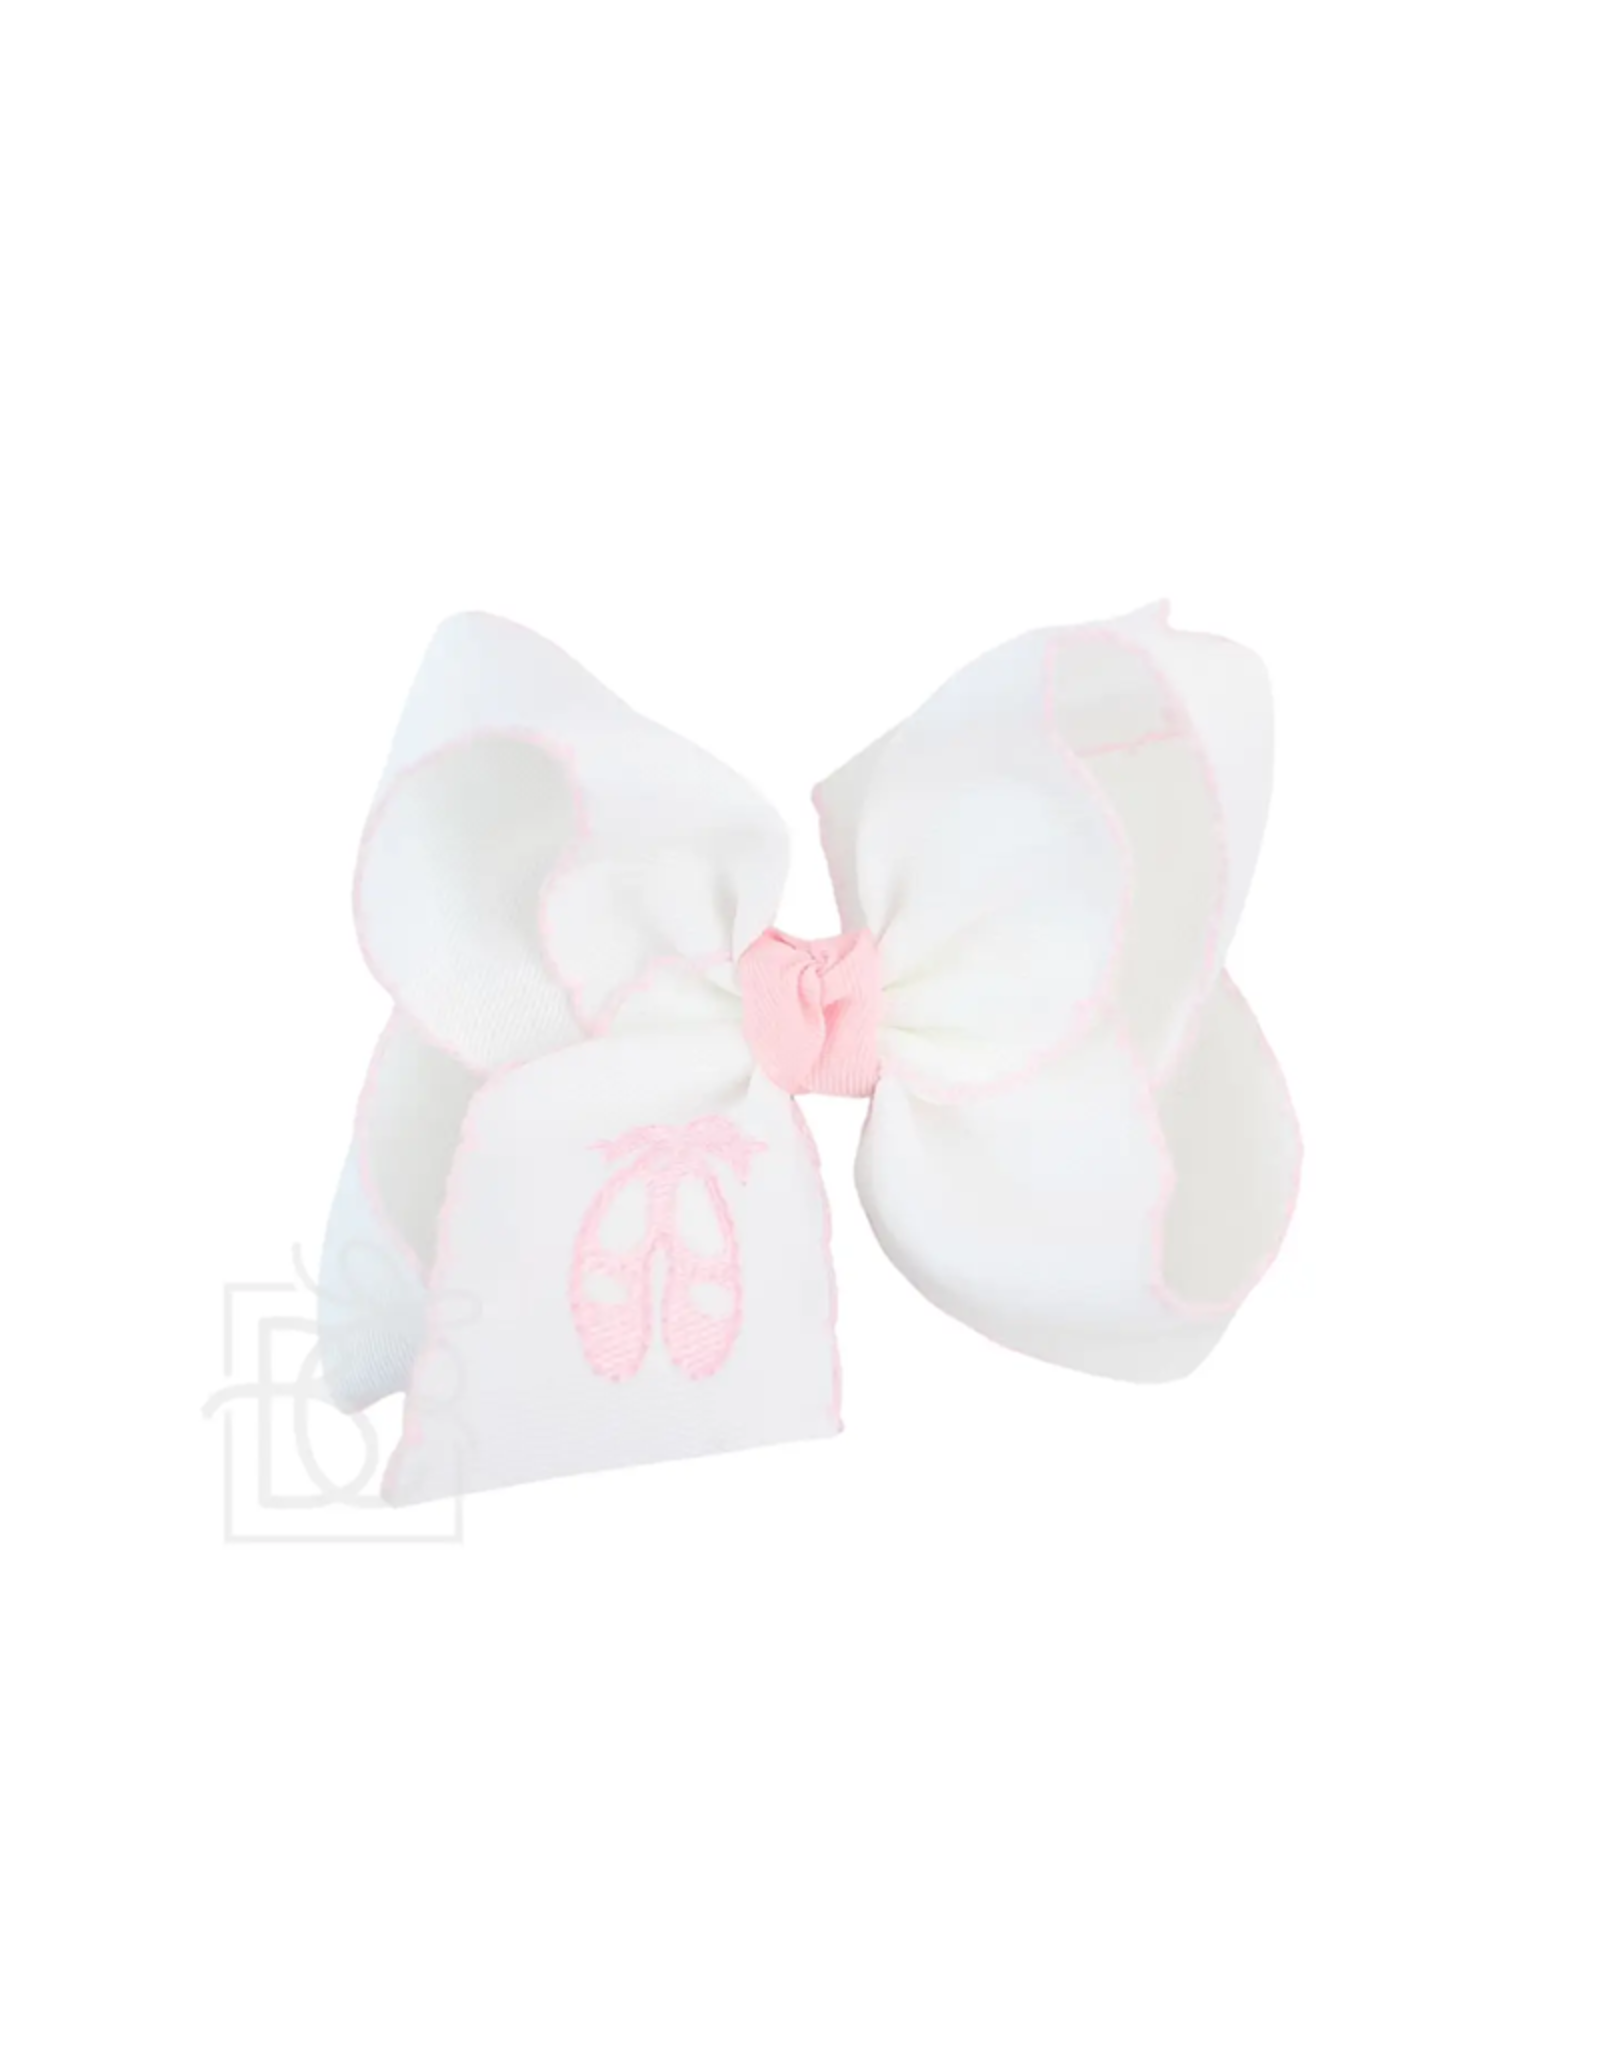 Beyond Creations ECKL Ballet Shoes Bow 029/117